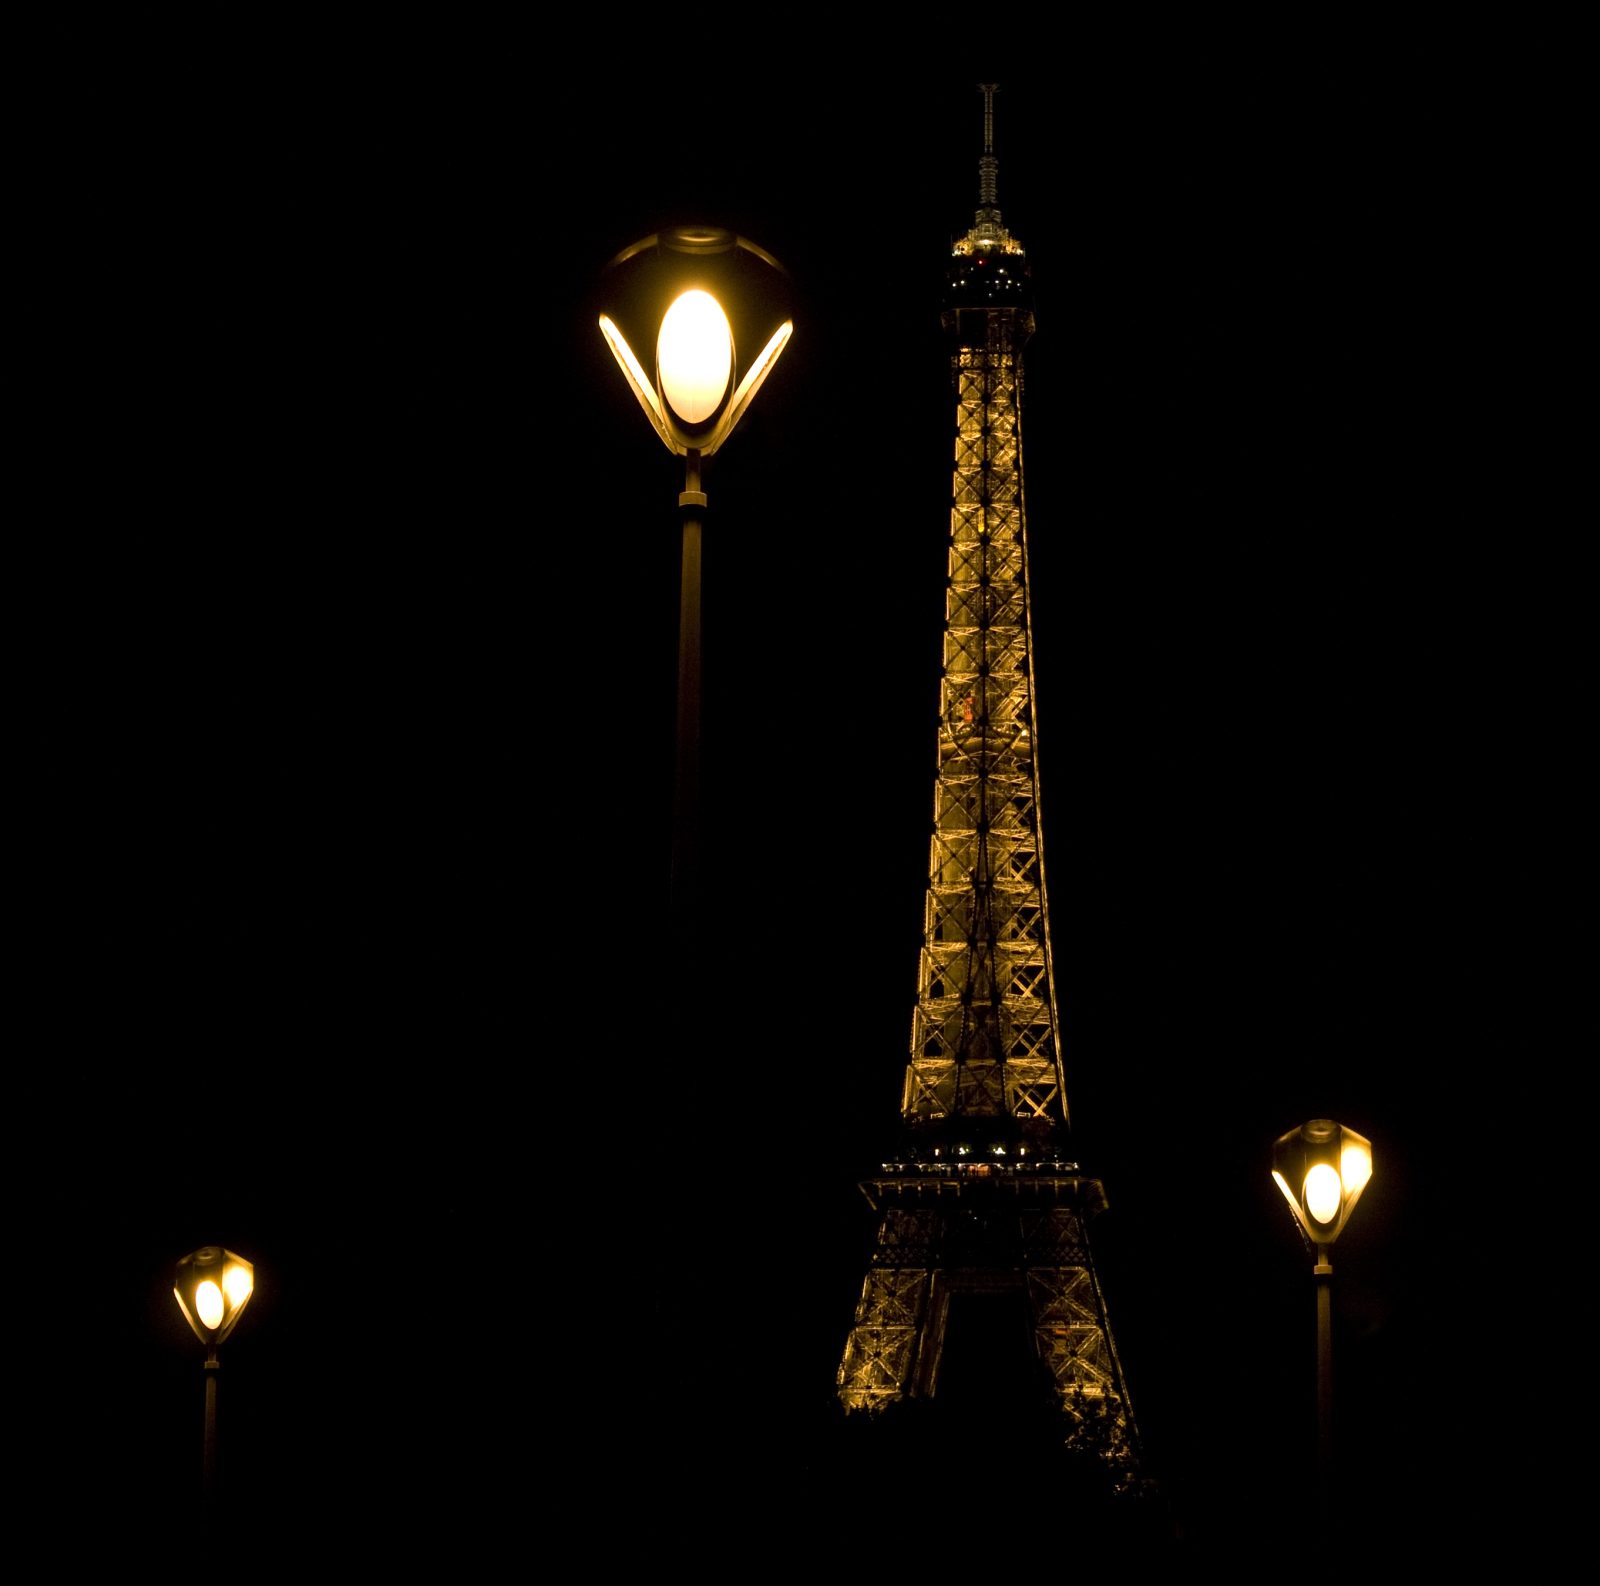 PA00088801MG_7339_Tour_Eiffel_by_night Par RousseauP (Travail personnel) [CC BY-SA 3.0 (httpcreativecommons.orglicensesby-sa3.0)], via Wikimedia Commons